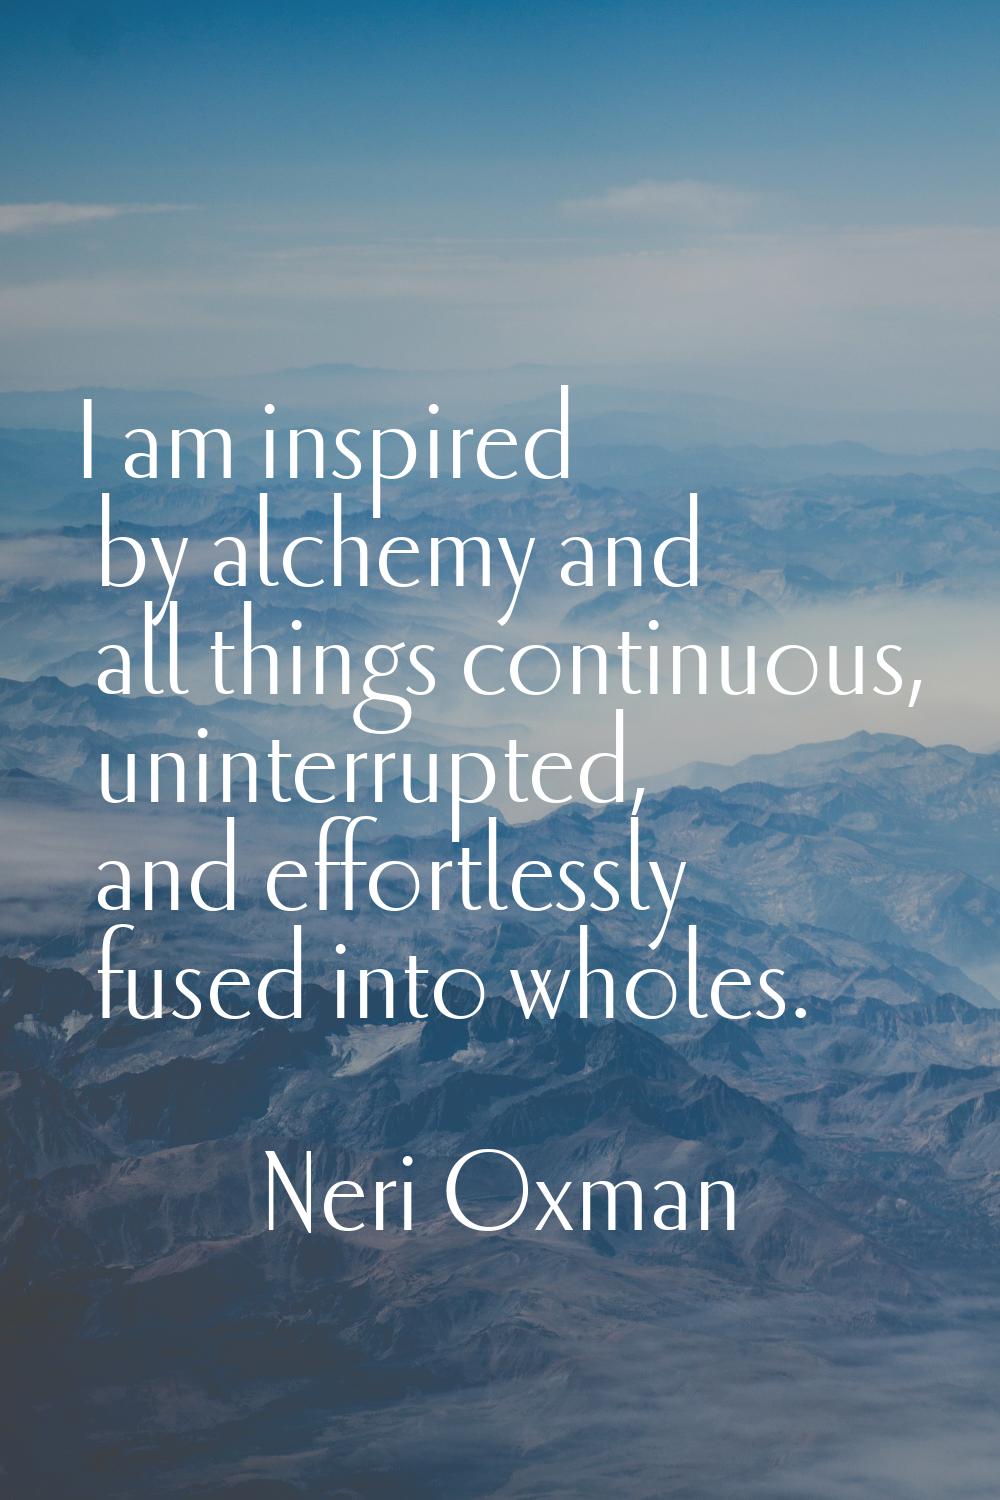 I am inspired by alchemy and all things continuous, uninterrupted, and effortlessly fused into whol